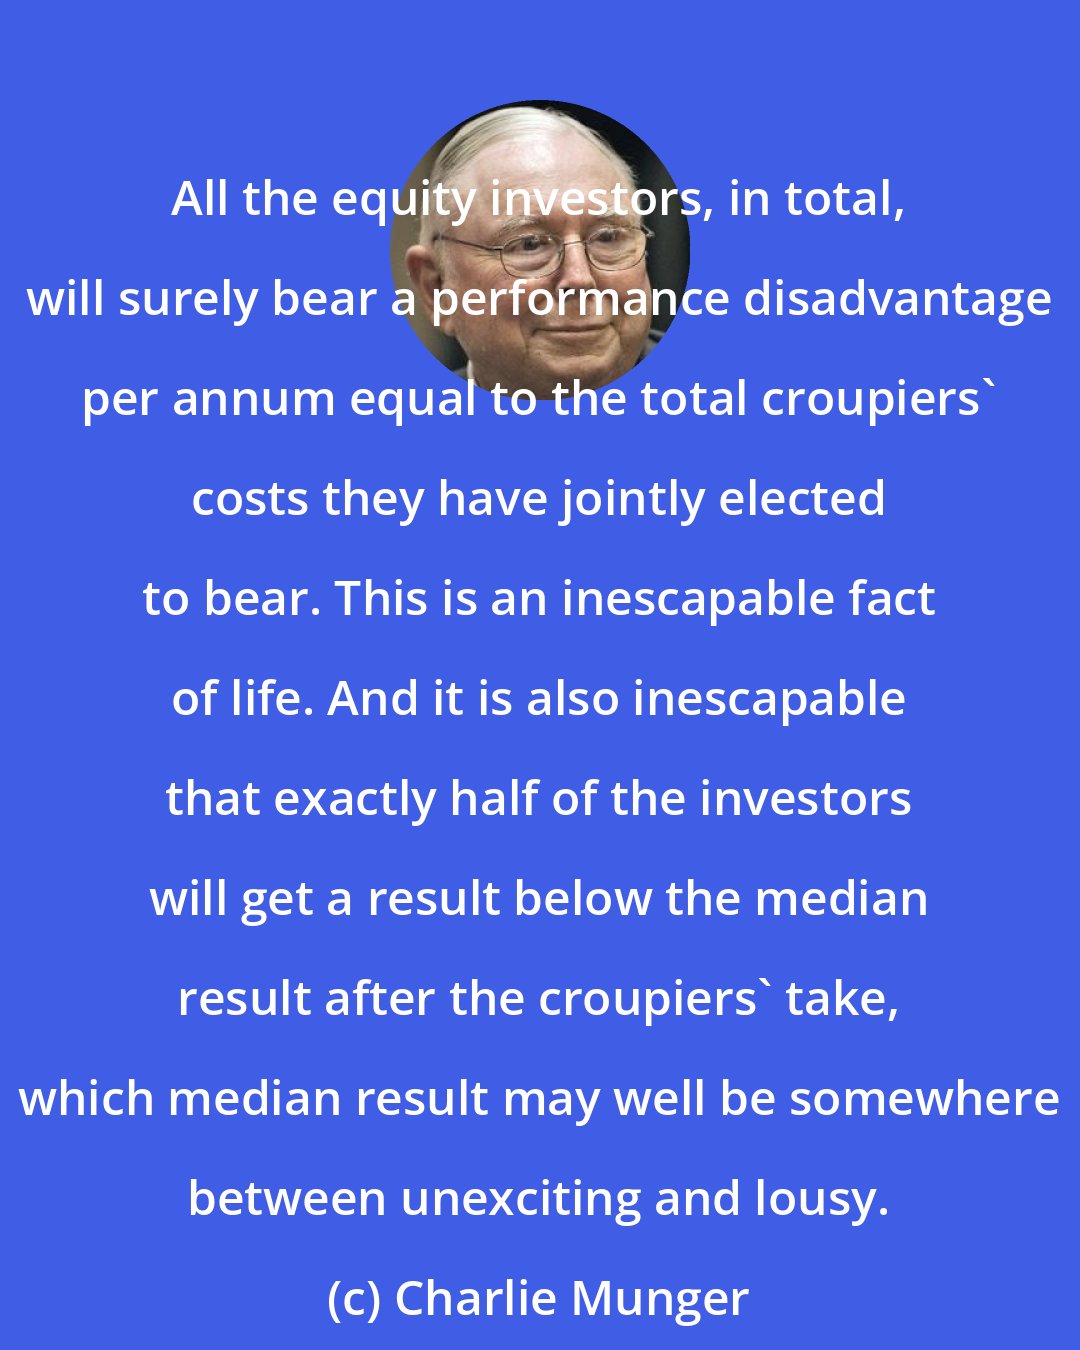 Charlie Munger: All the equity investors, in total, will surely bear a performance disadvantage per annum equal to the total croupiers' costs they have jointly elected to bear. This is an inescapable fact of life. And it is also inescapable that exactly half of the investors will get a result below the median result after the croupiers' take, which median result may well be somewhere between unexciting and lousy.